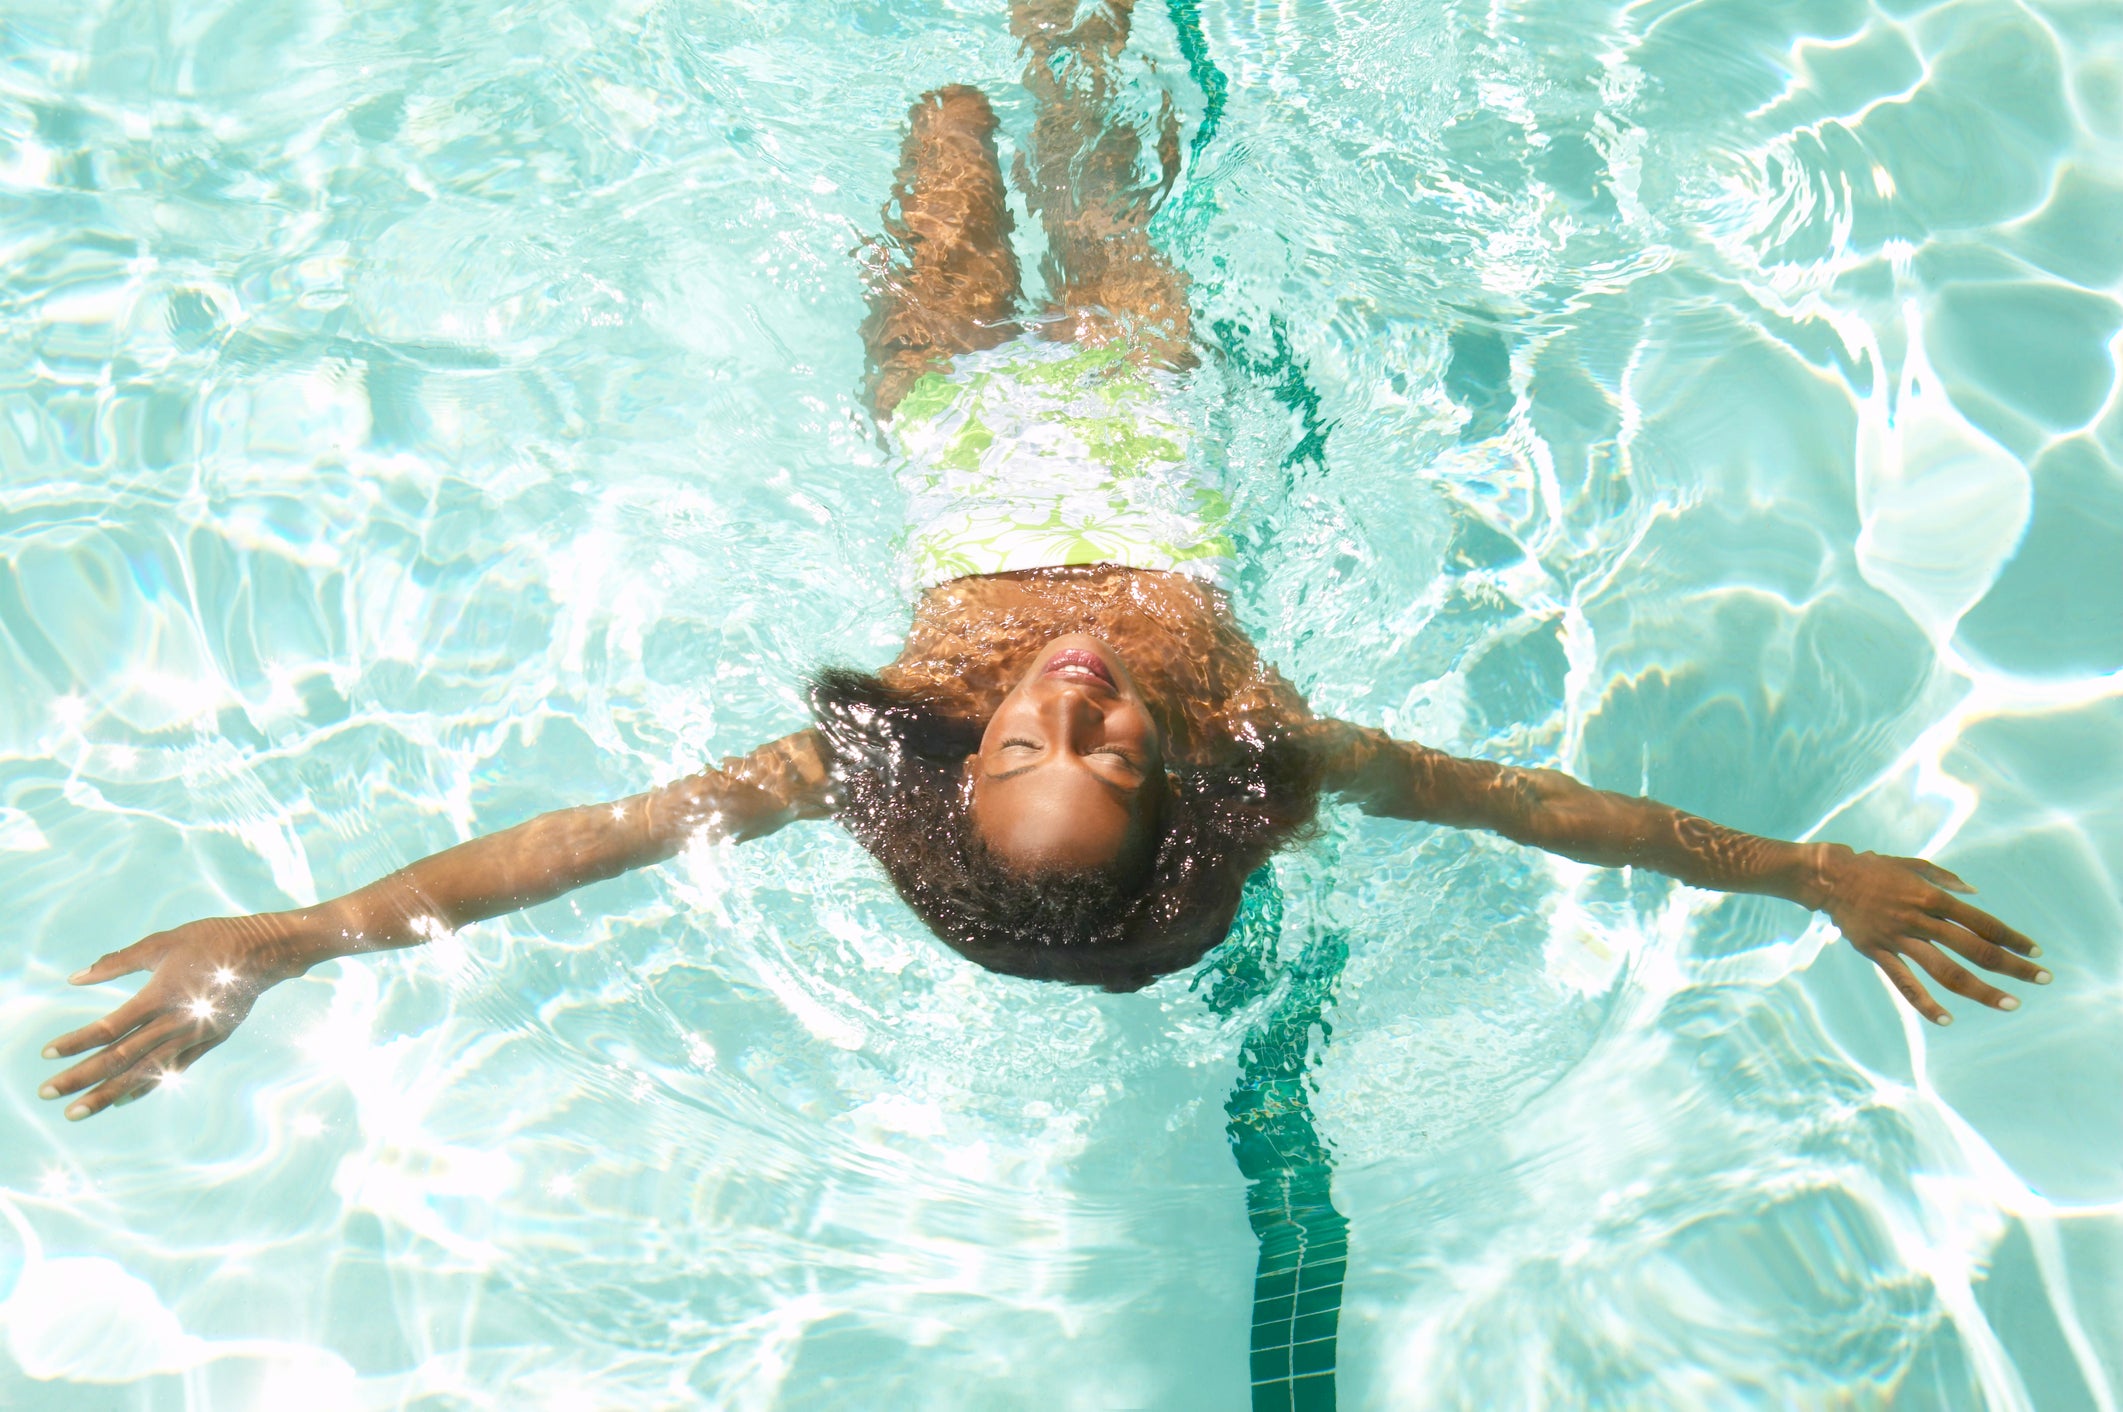 No Plans This Weekend? No Problem! This App Lets You Rent Other People’s Pools